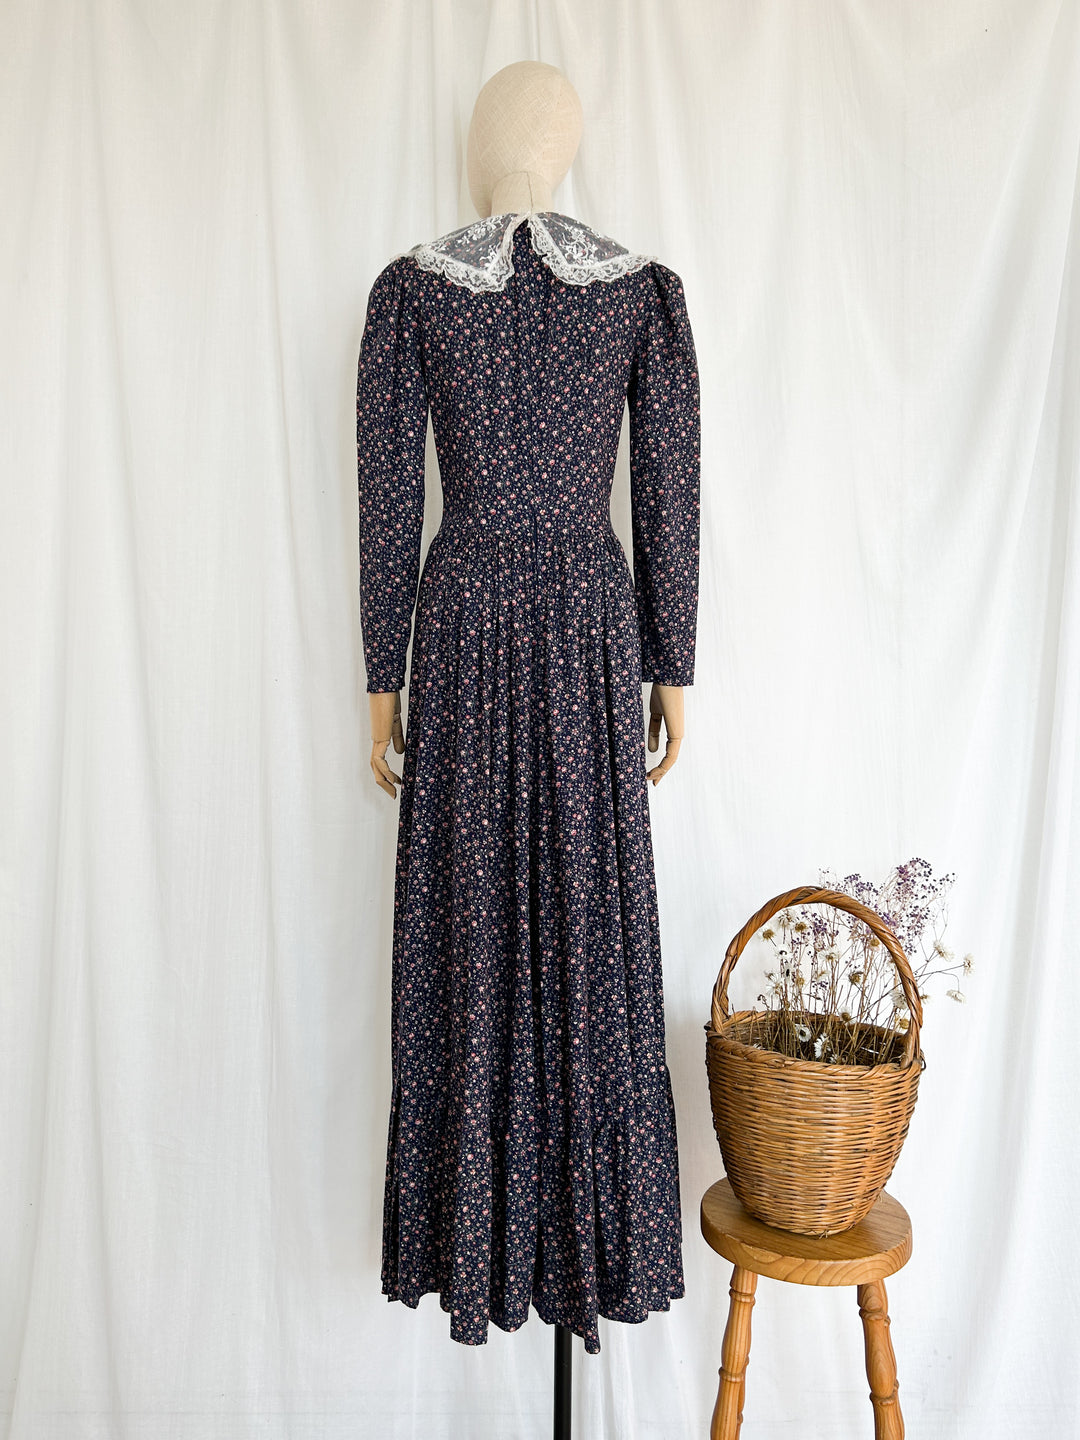 Rosa ~ Dreamy Lace Collar Navy and Pink Floral Cotton 70s Dream Dress